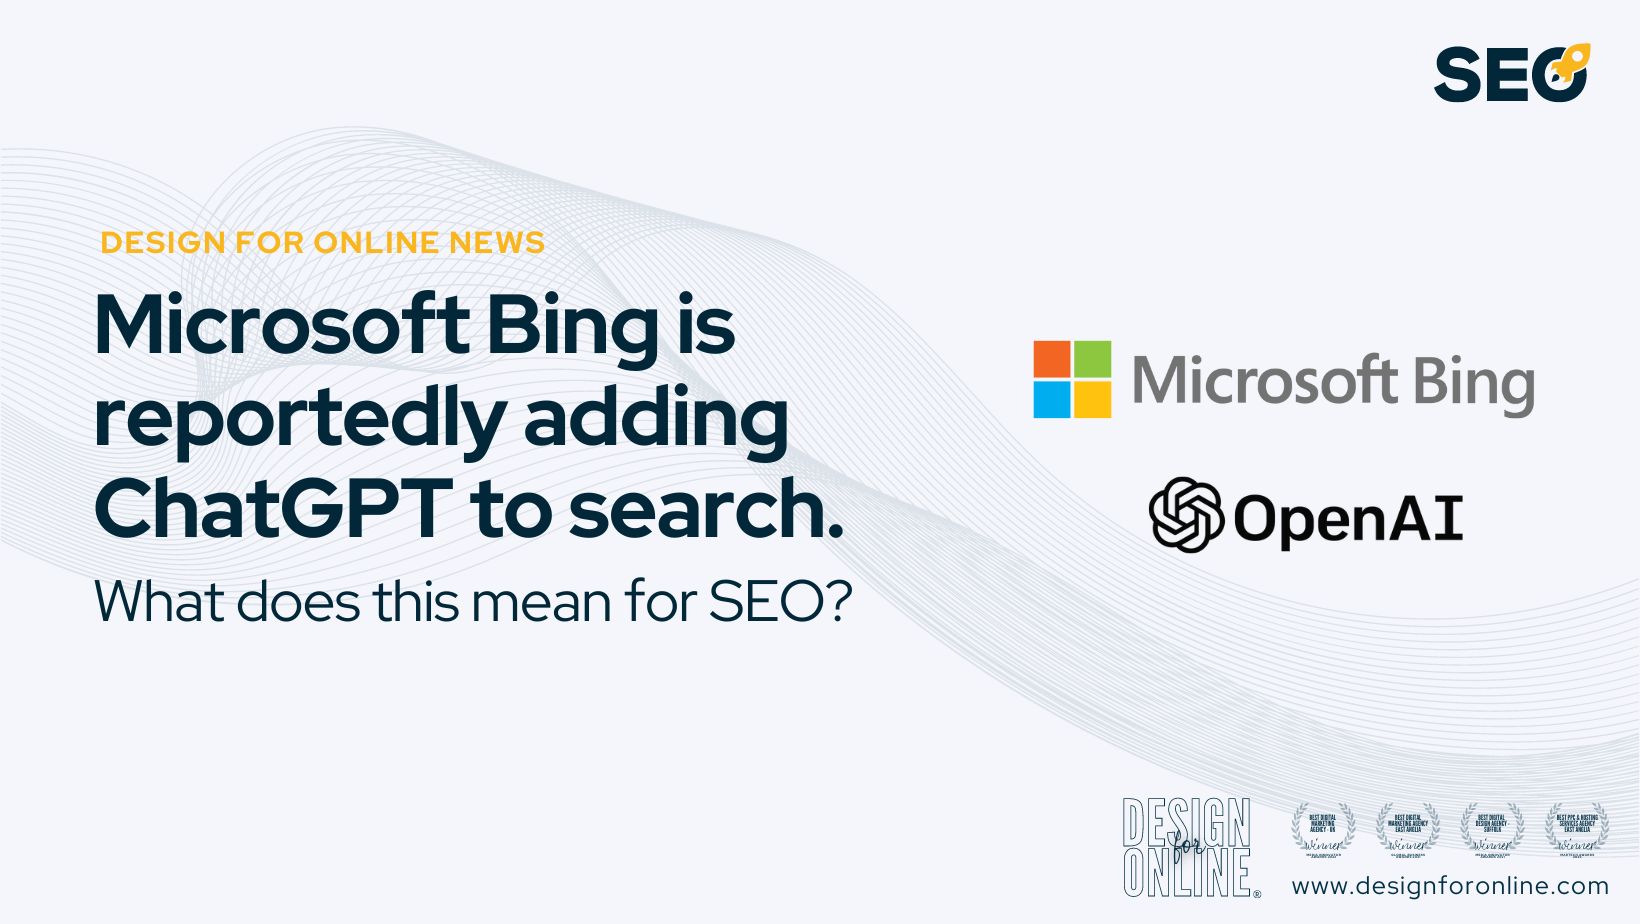 Microsoft Bing integrating with ChatGPT by OpenAI in March